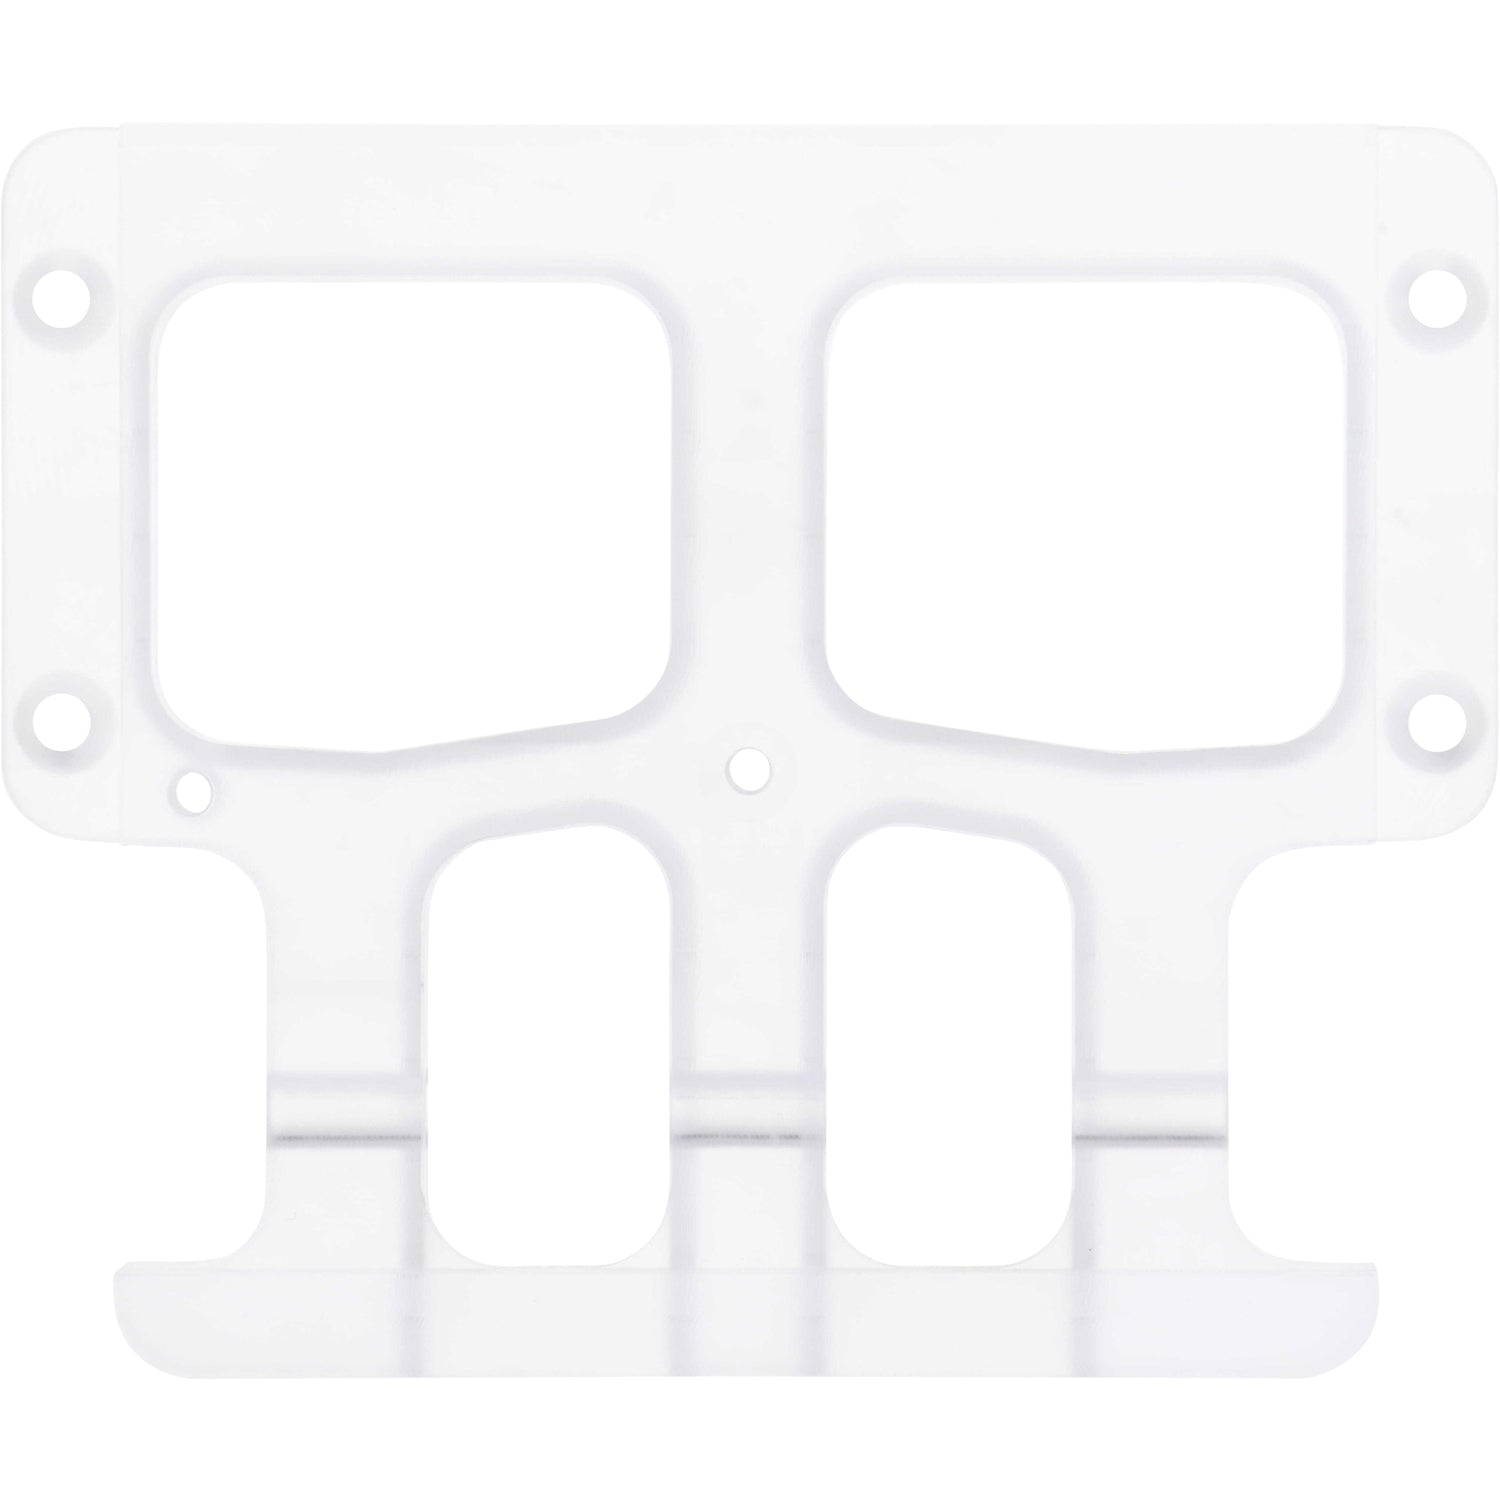 Flat, semi-transparent machined part with holes on a white background. L5E